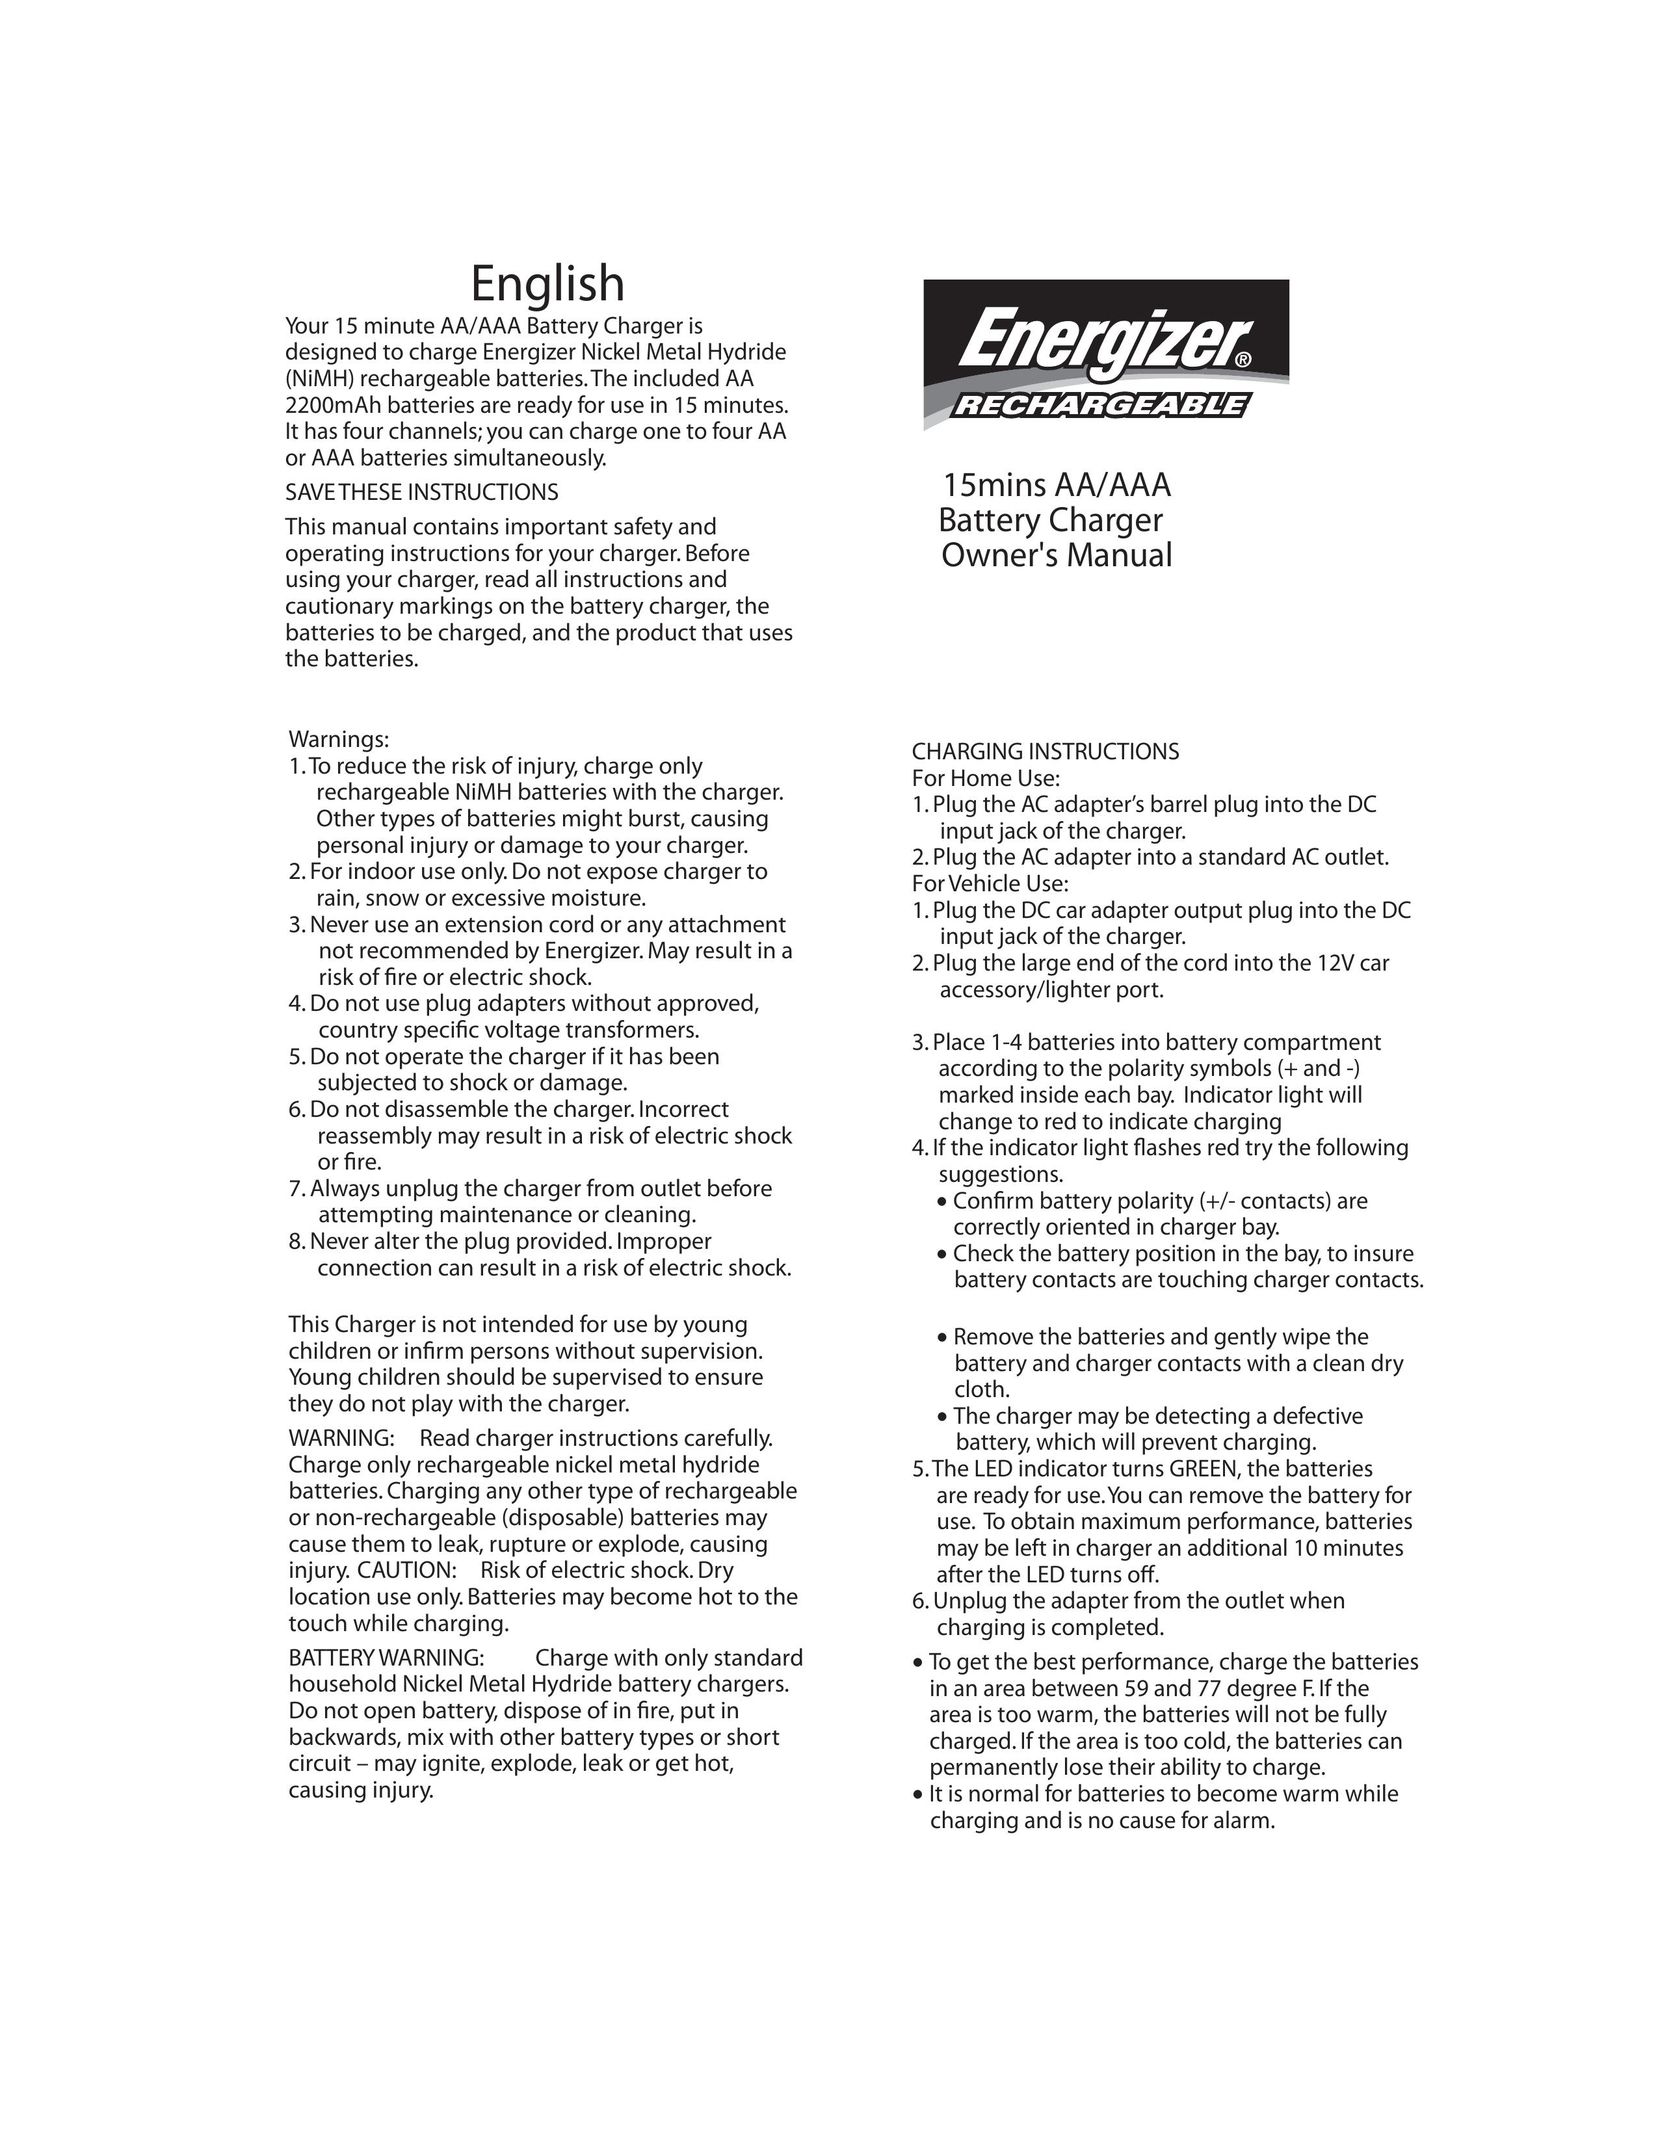 Energizer Battery Charger Battery Charger User Manual